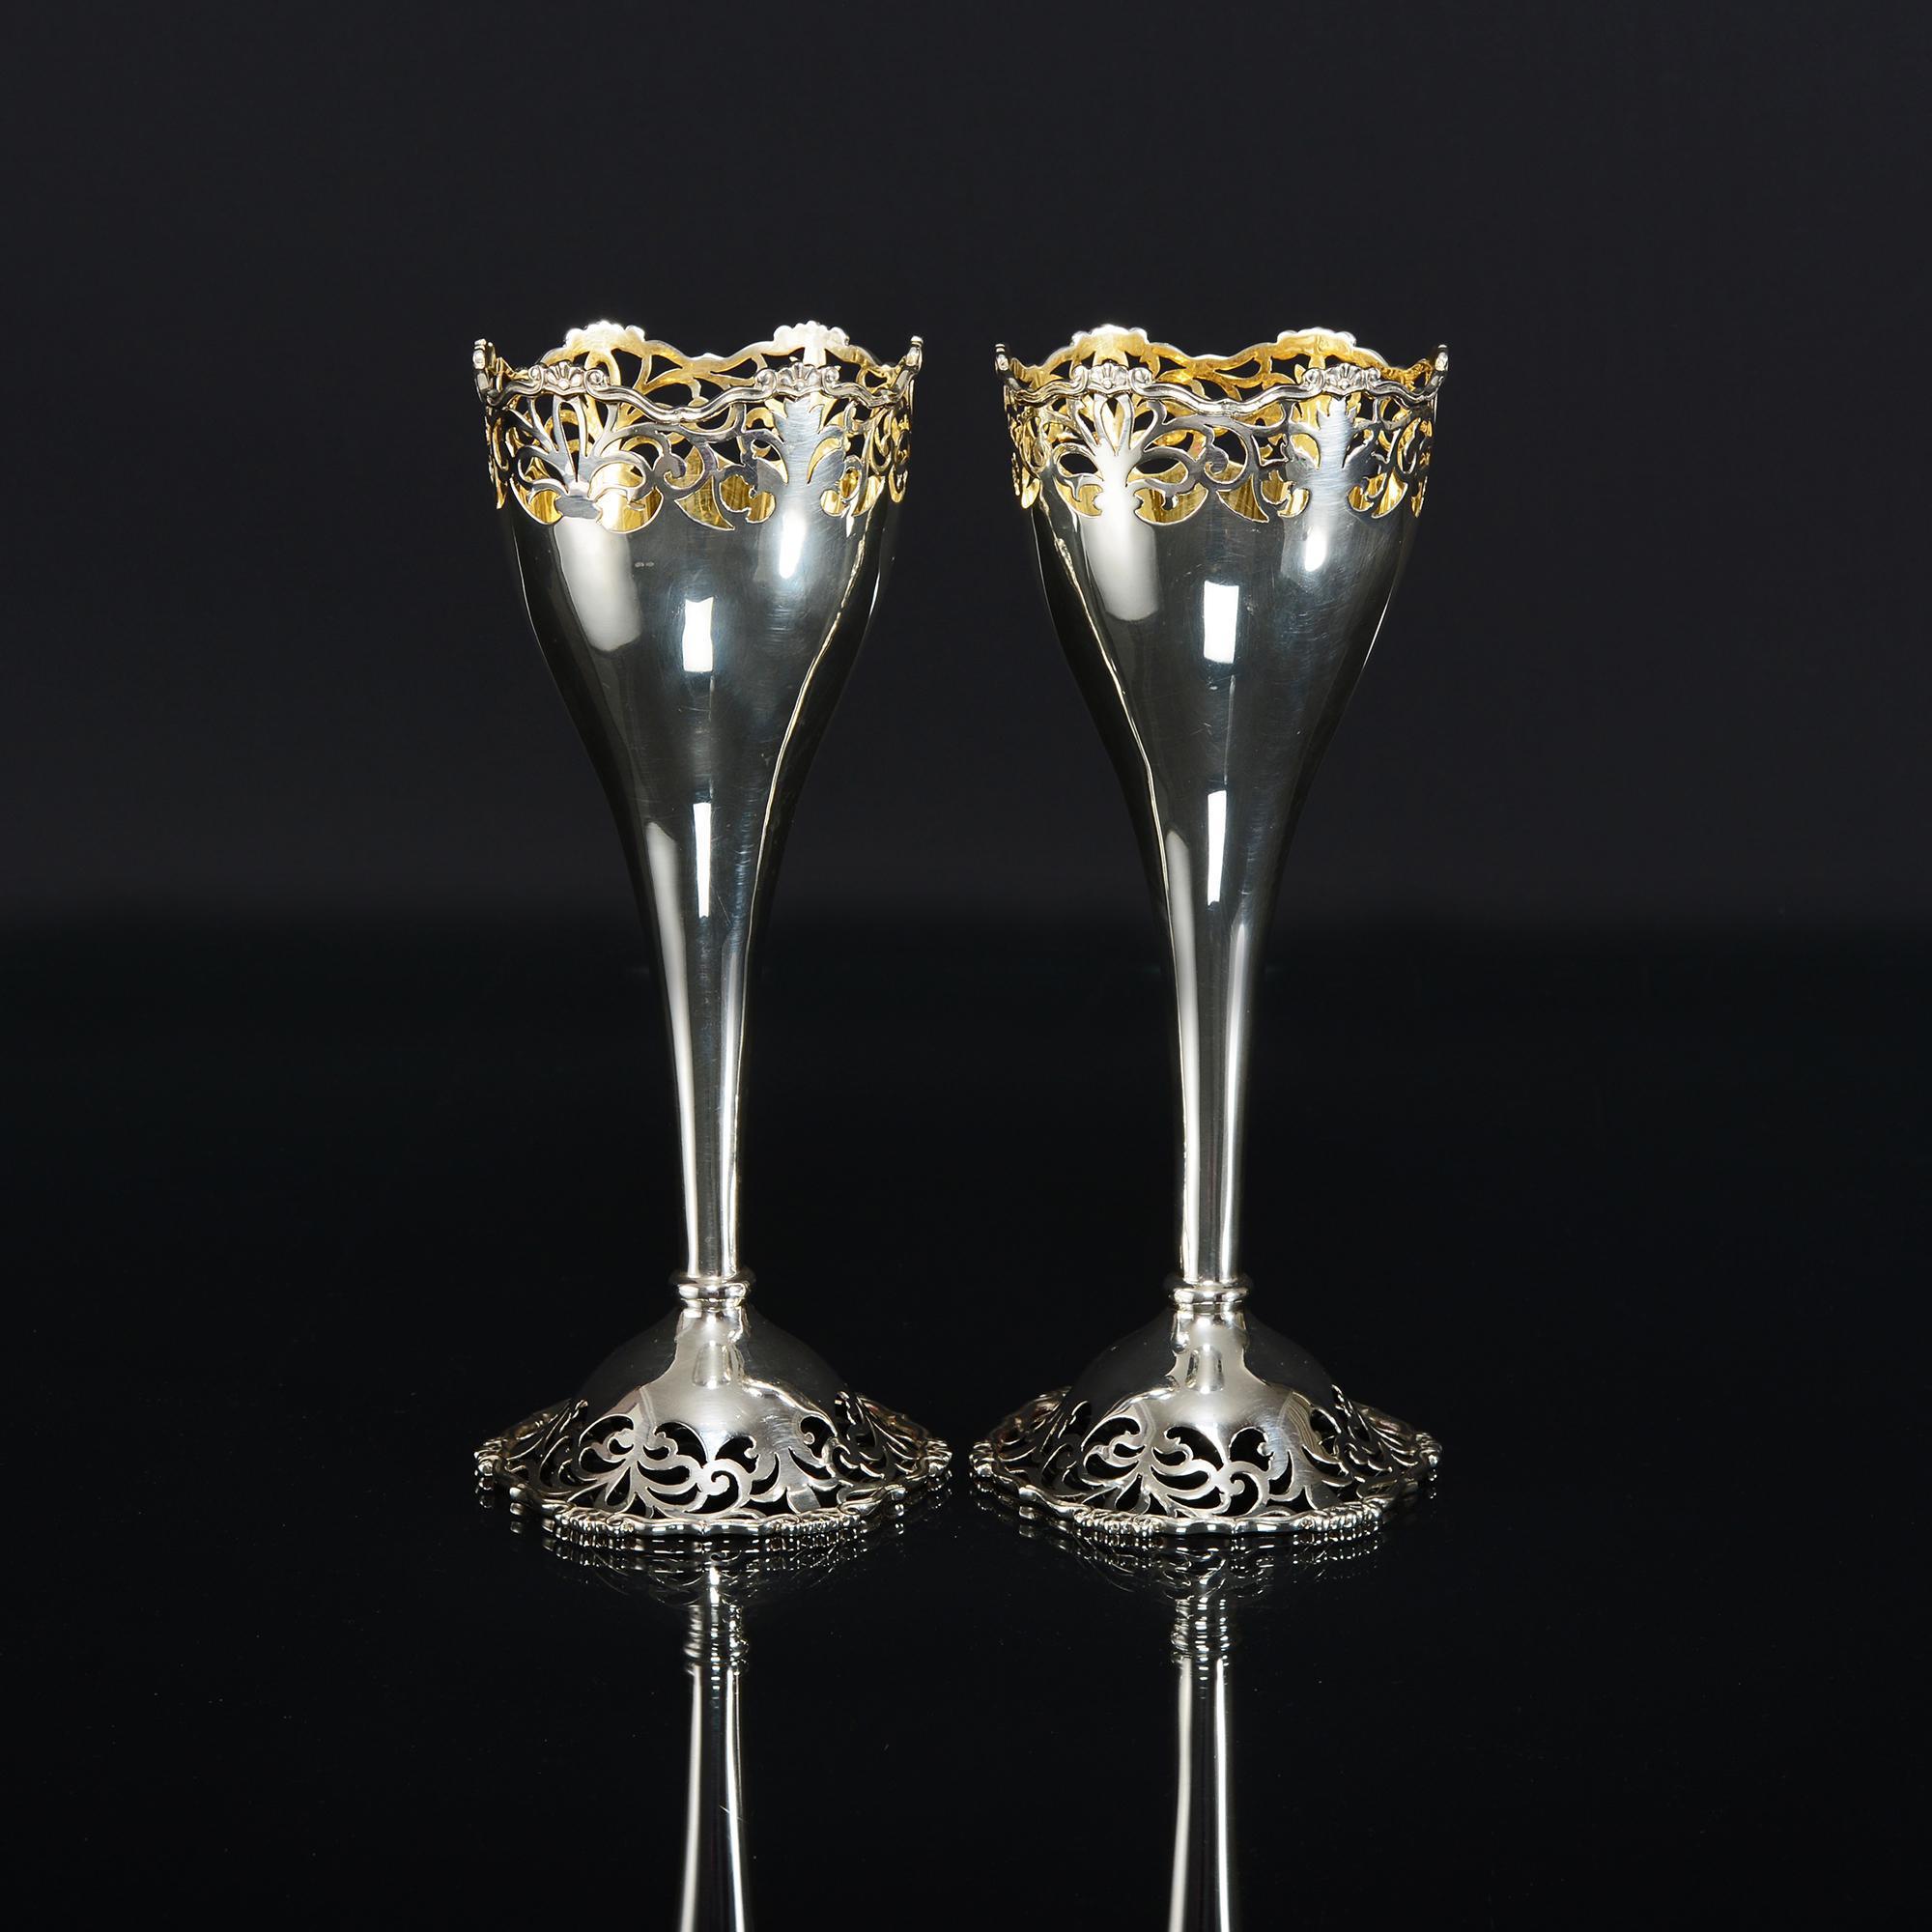 Pair of Antique Silver Vases with Hand-Pierced Decoration In Good Condition For Sale In London, GB